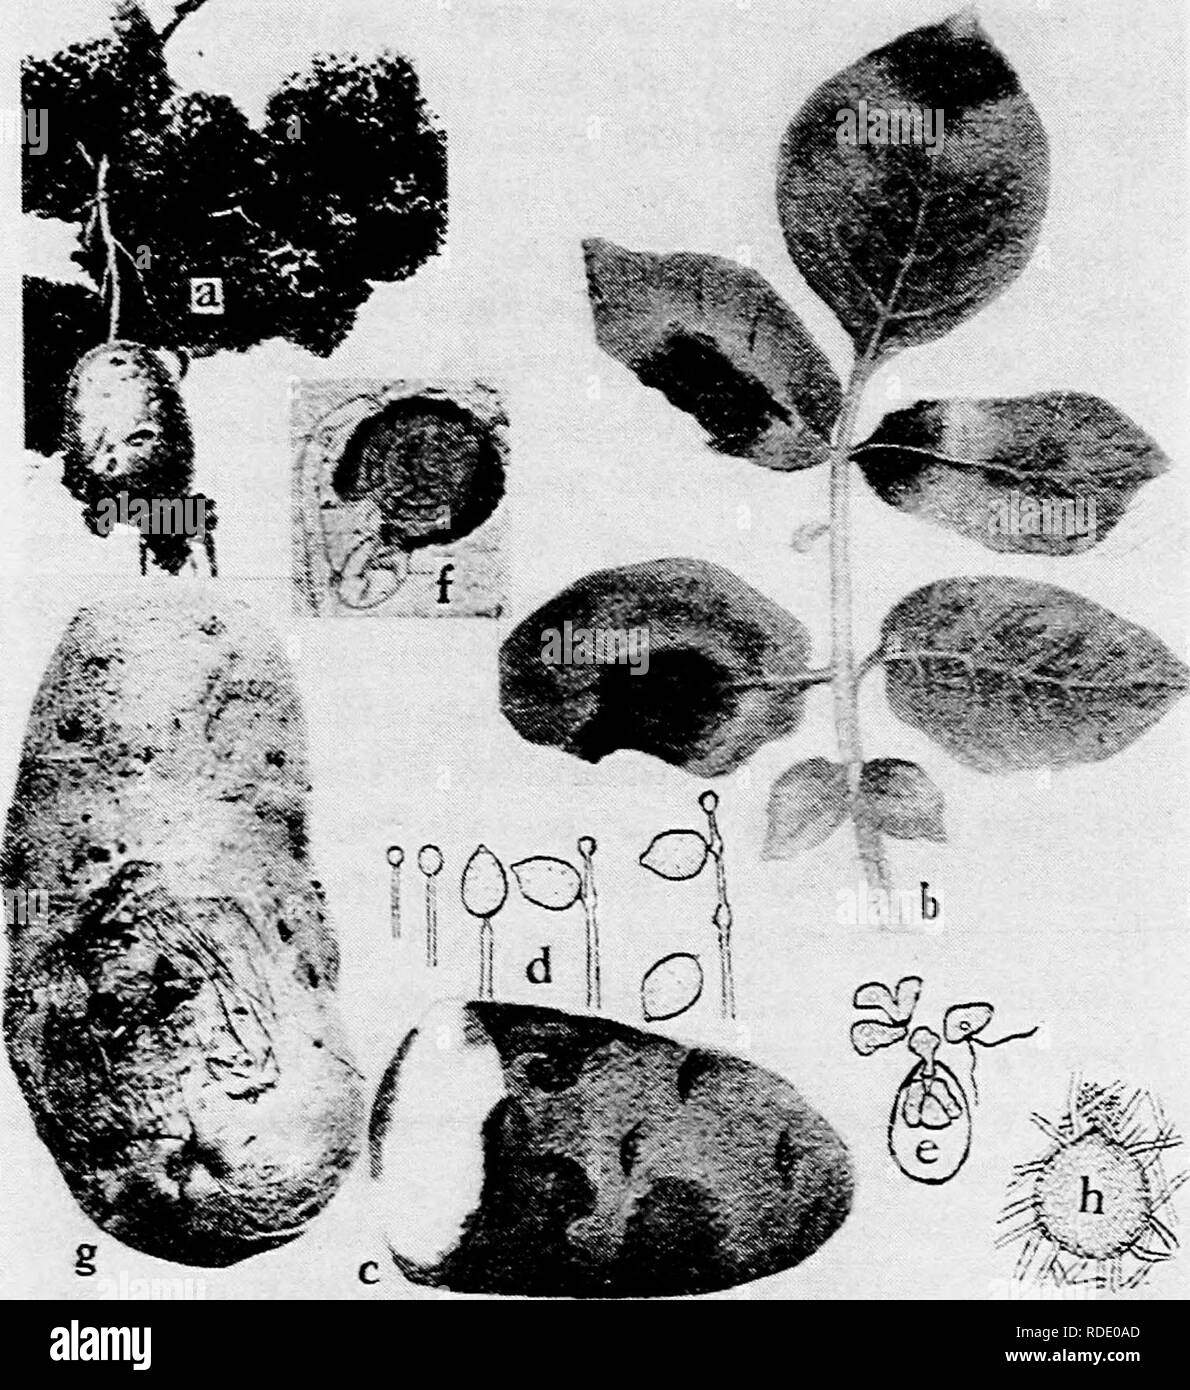 . Diseases of truck crops and their control . Vegetables. Fig. 6i. Potato Diseases. a. Black wart (after Gussow), b. late blight on foliage, c, late blight on tuber, d. successive stages of the development of the conidia of Phyiophthora infestans (6. and d. after L. R. Jones), e, germination of conidia of Phytophthora infestans, by means of zoopores (after Ward),/, mature oogonium of P. infestans (after Clinton), g. melters, surface view, early stage of infection, h. pycnidium of Phoma tuherosa (after Melhus and Rosenbaum).. Please note that these images are extracted from scanned page images  Stock Photo